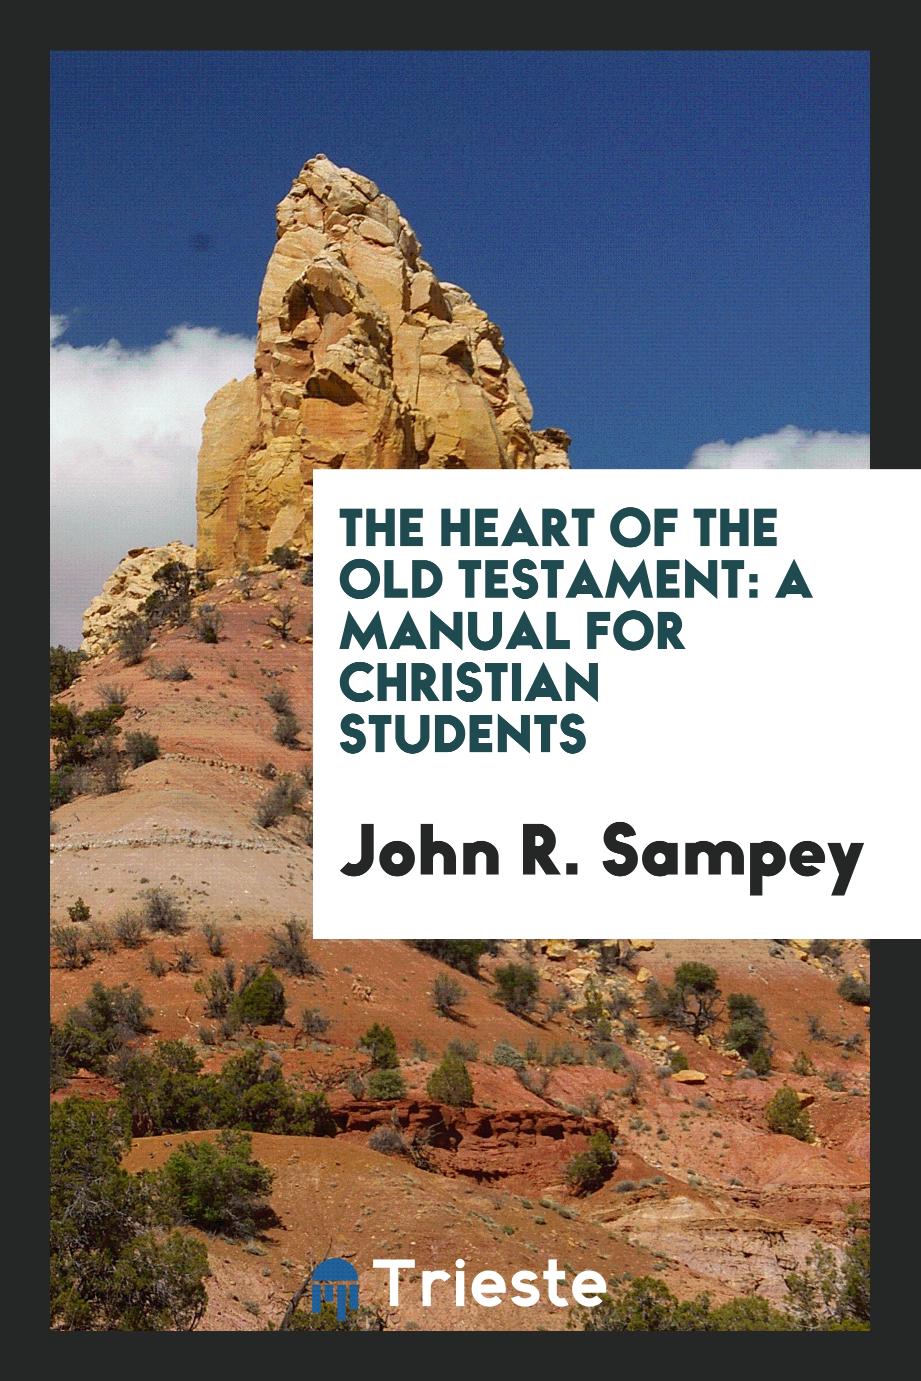 John R. Sampey - The heart of the Old Testament: a manual for Christian students